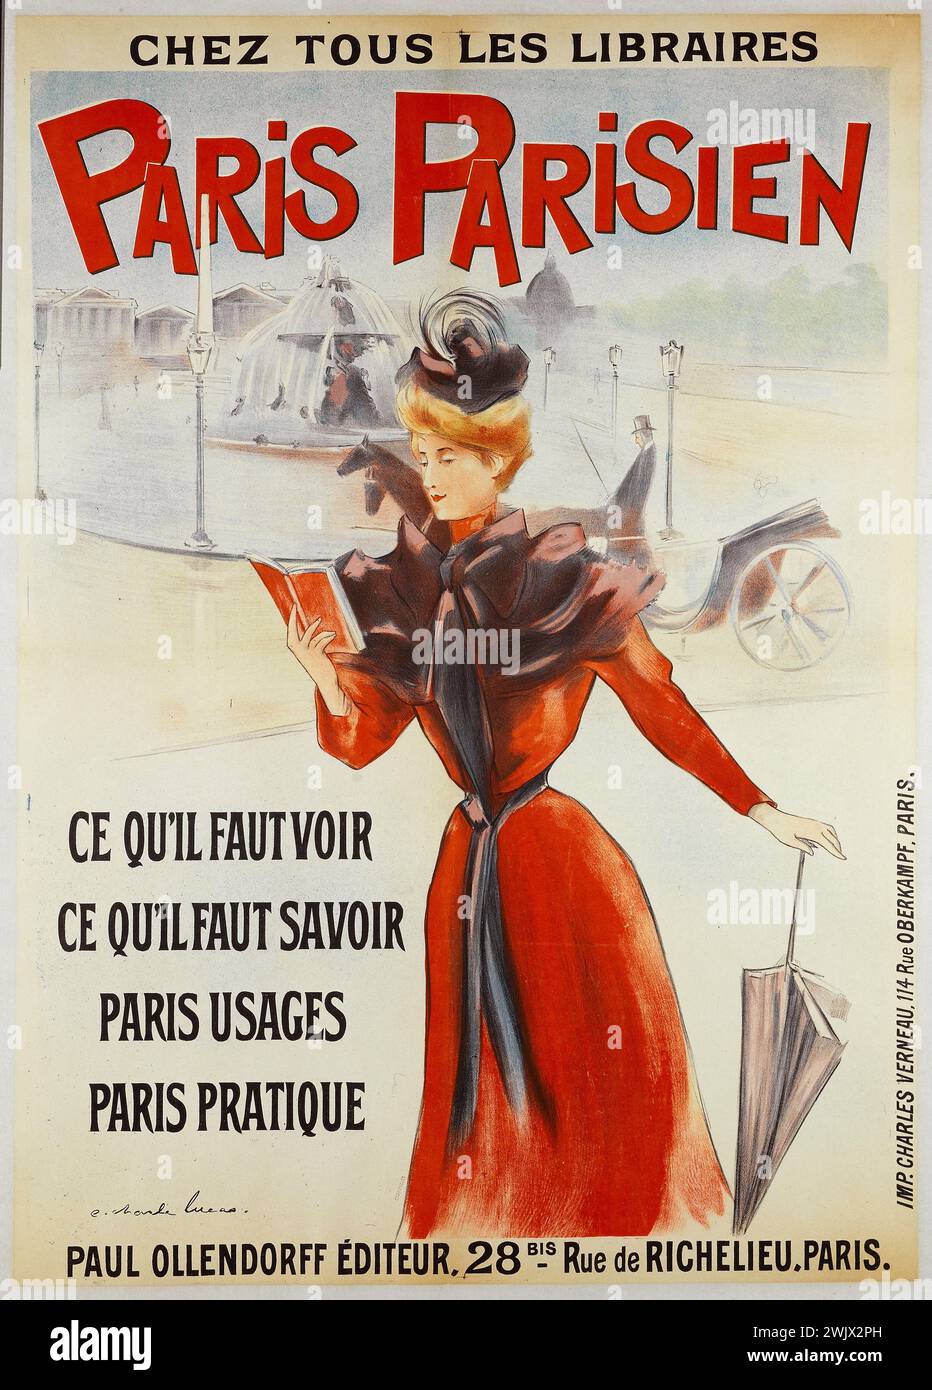 Charles Lucas. Charles Verneau printing house. 'At all booksellers, Parisian Paris, Paul Ollendorff Editor'. Poster. Color lithography, 1897. Paris, Carnavalet museum. Advertising poster, guide, newspaper, read, color lithography, Parisian Paris, woman practice, advertising Stock Photo